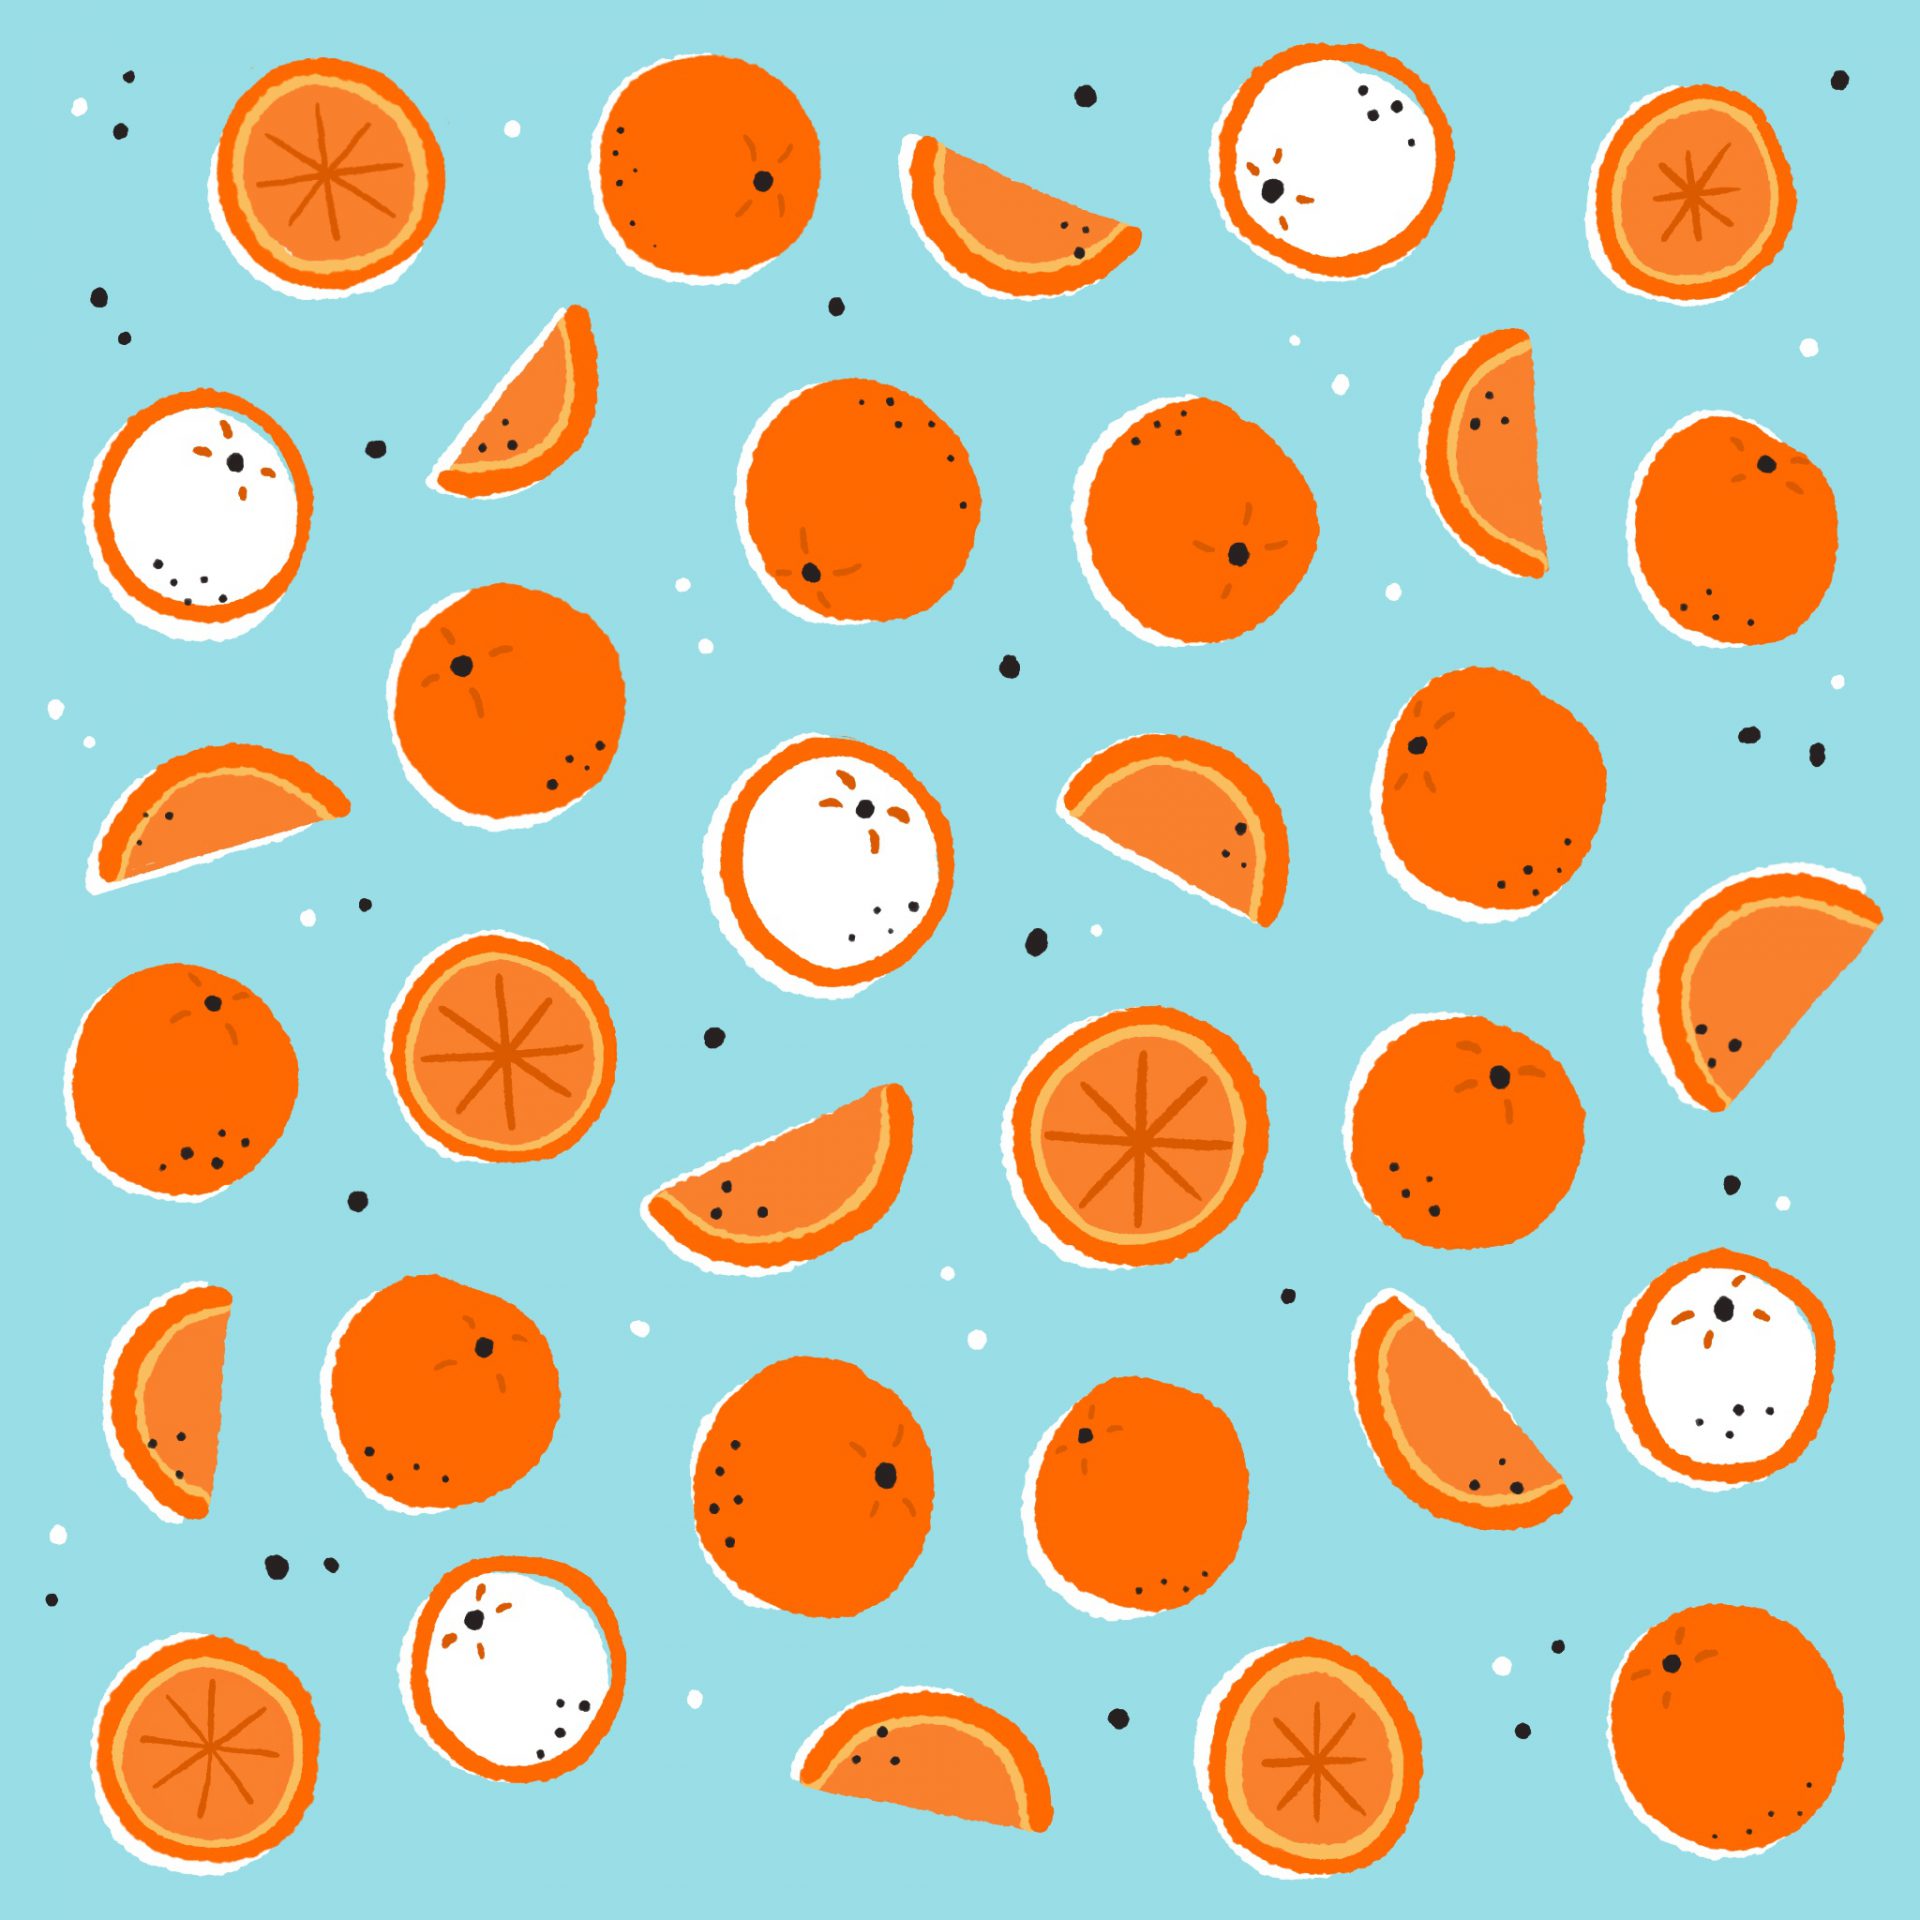 An illustrated pattern of oranges